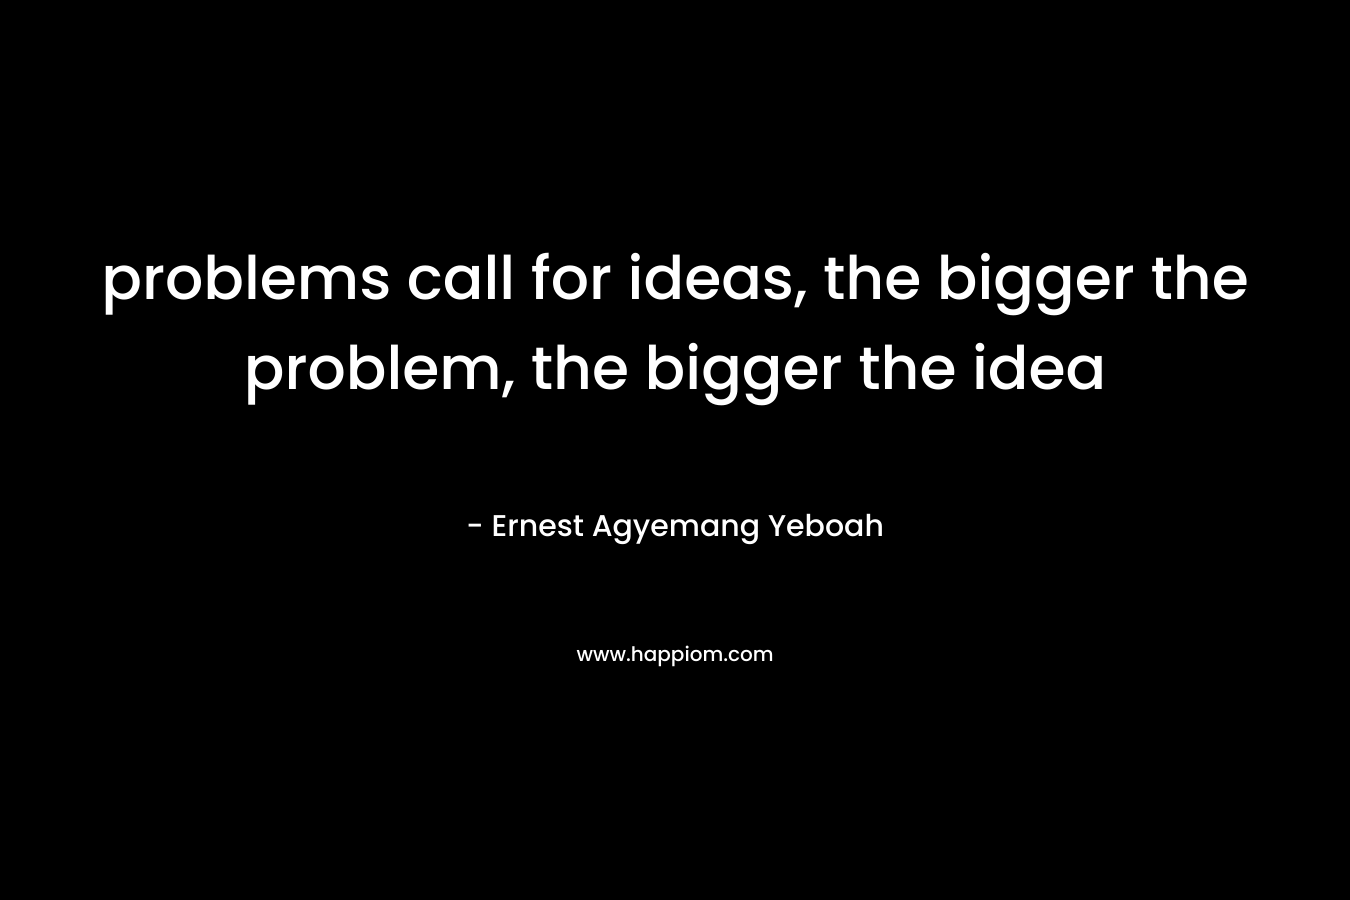 problems call for ideas, the bigger the problem, the bigger the idea